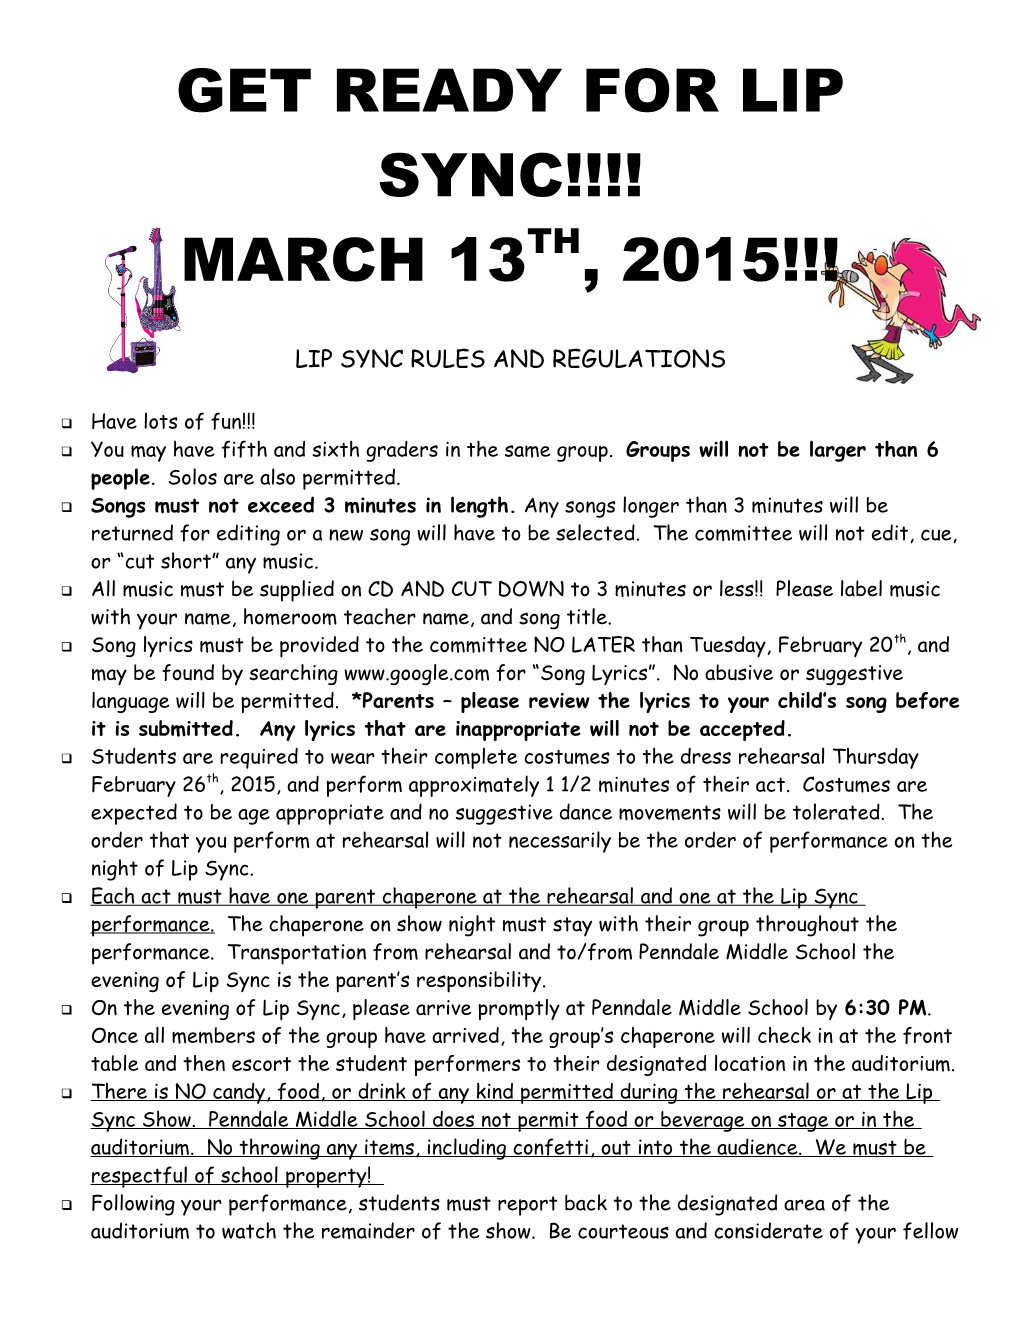 Lip Synch Rules and Regulations